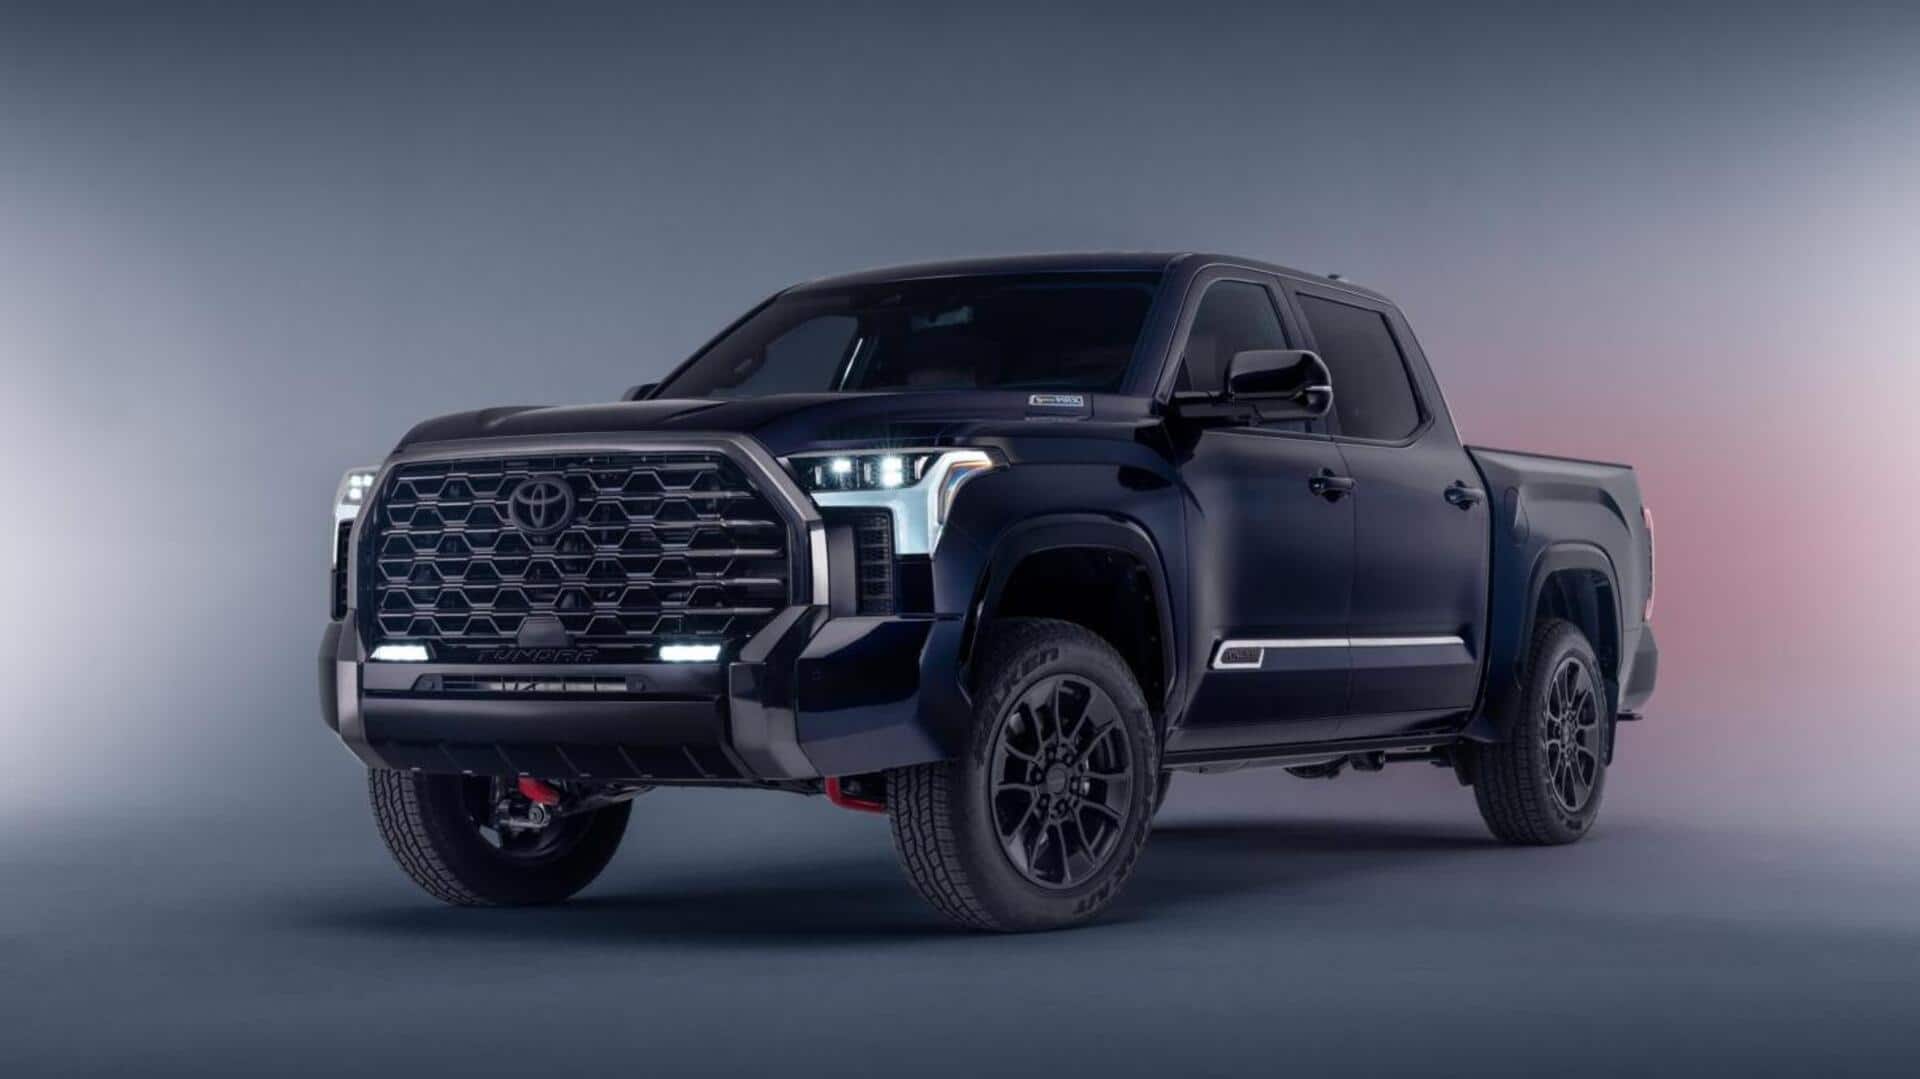 Limited-run Toyota Tundra offers blend of luxury, performance